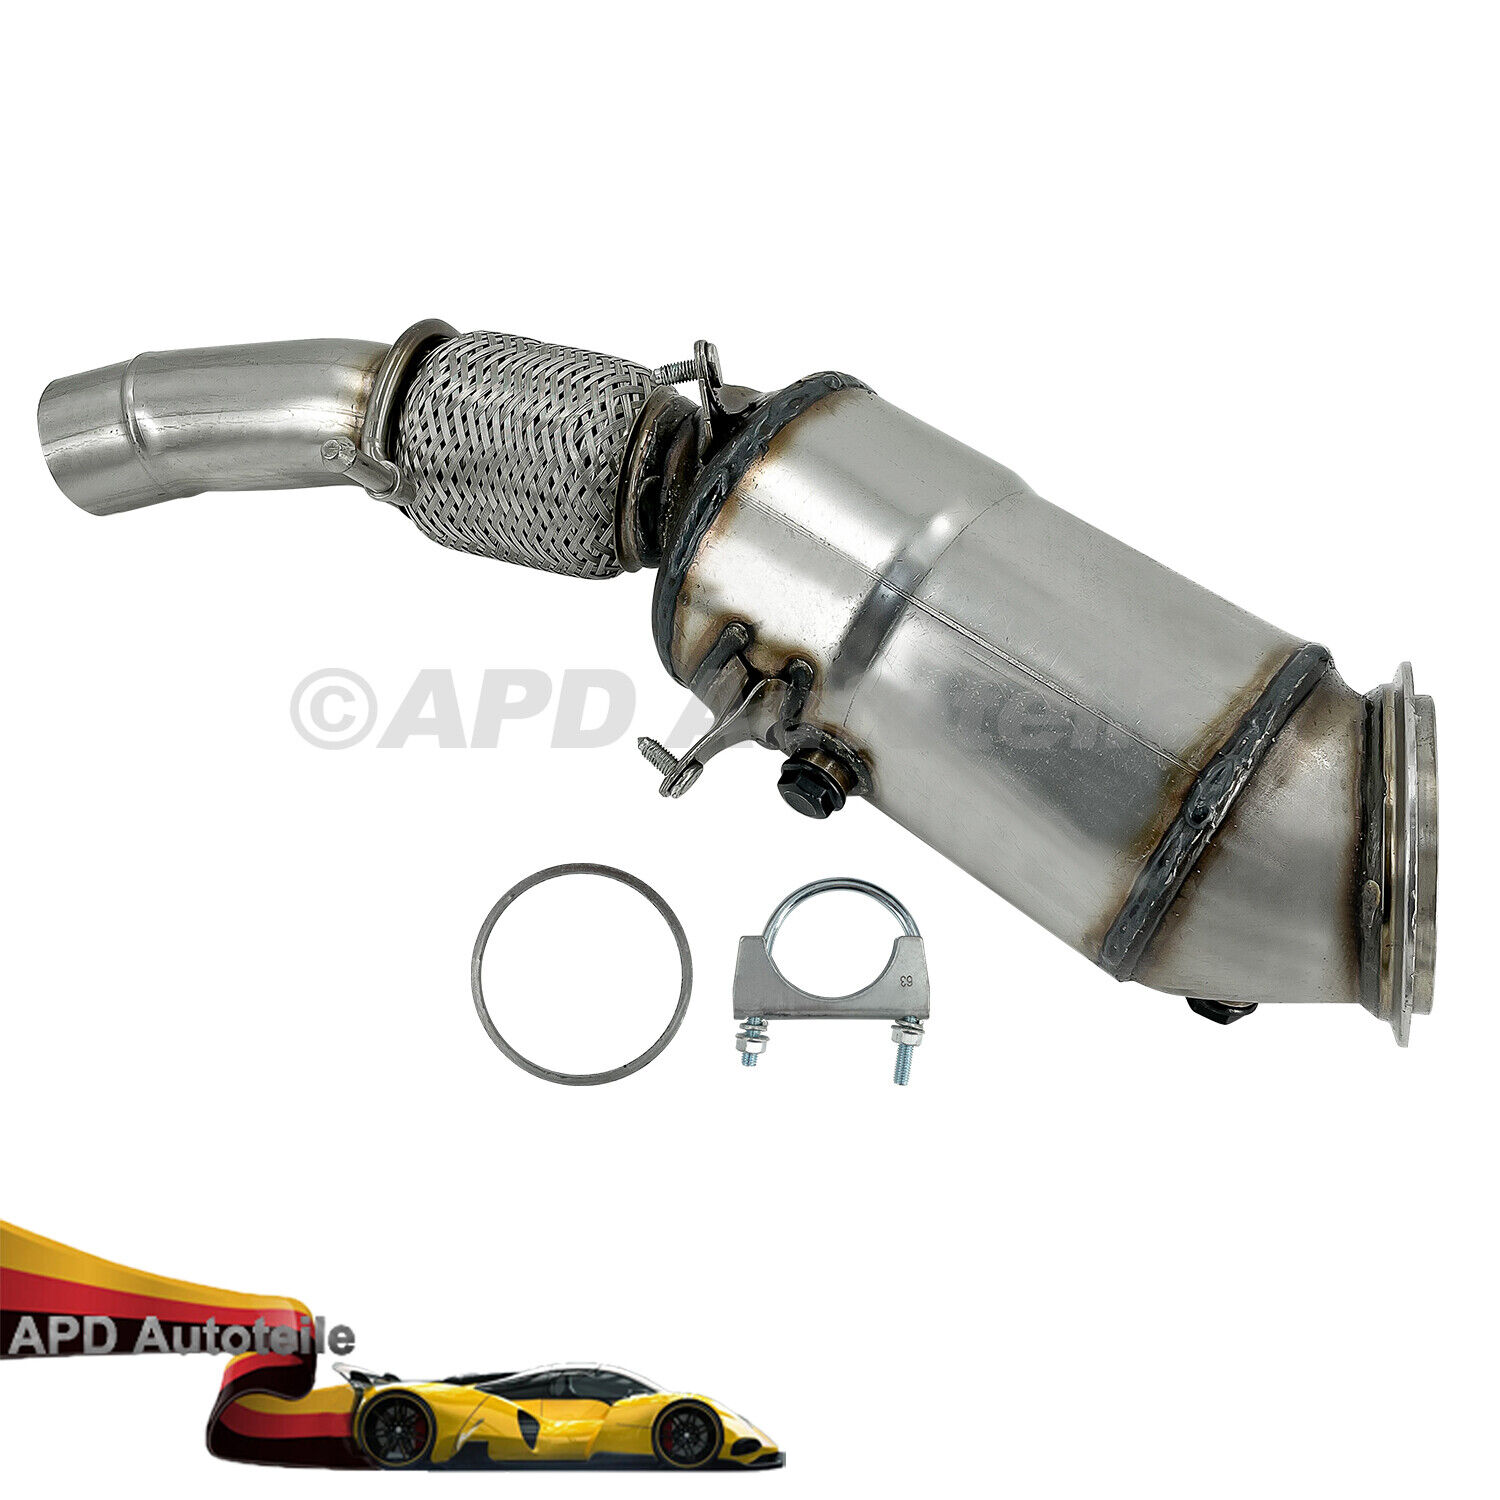 Catalytic Converter For 2013-2017 BMW X3 / X4 2.0L 7646432/ 7629253 /18327646432